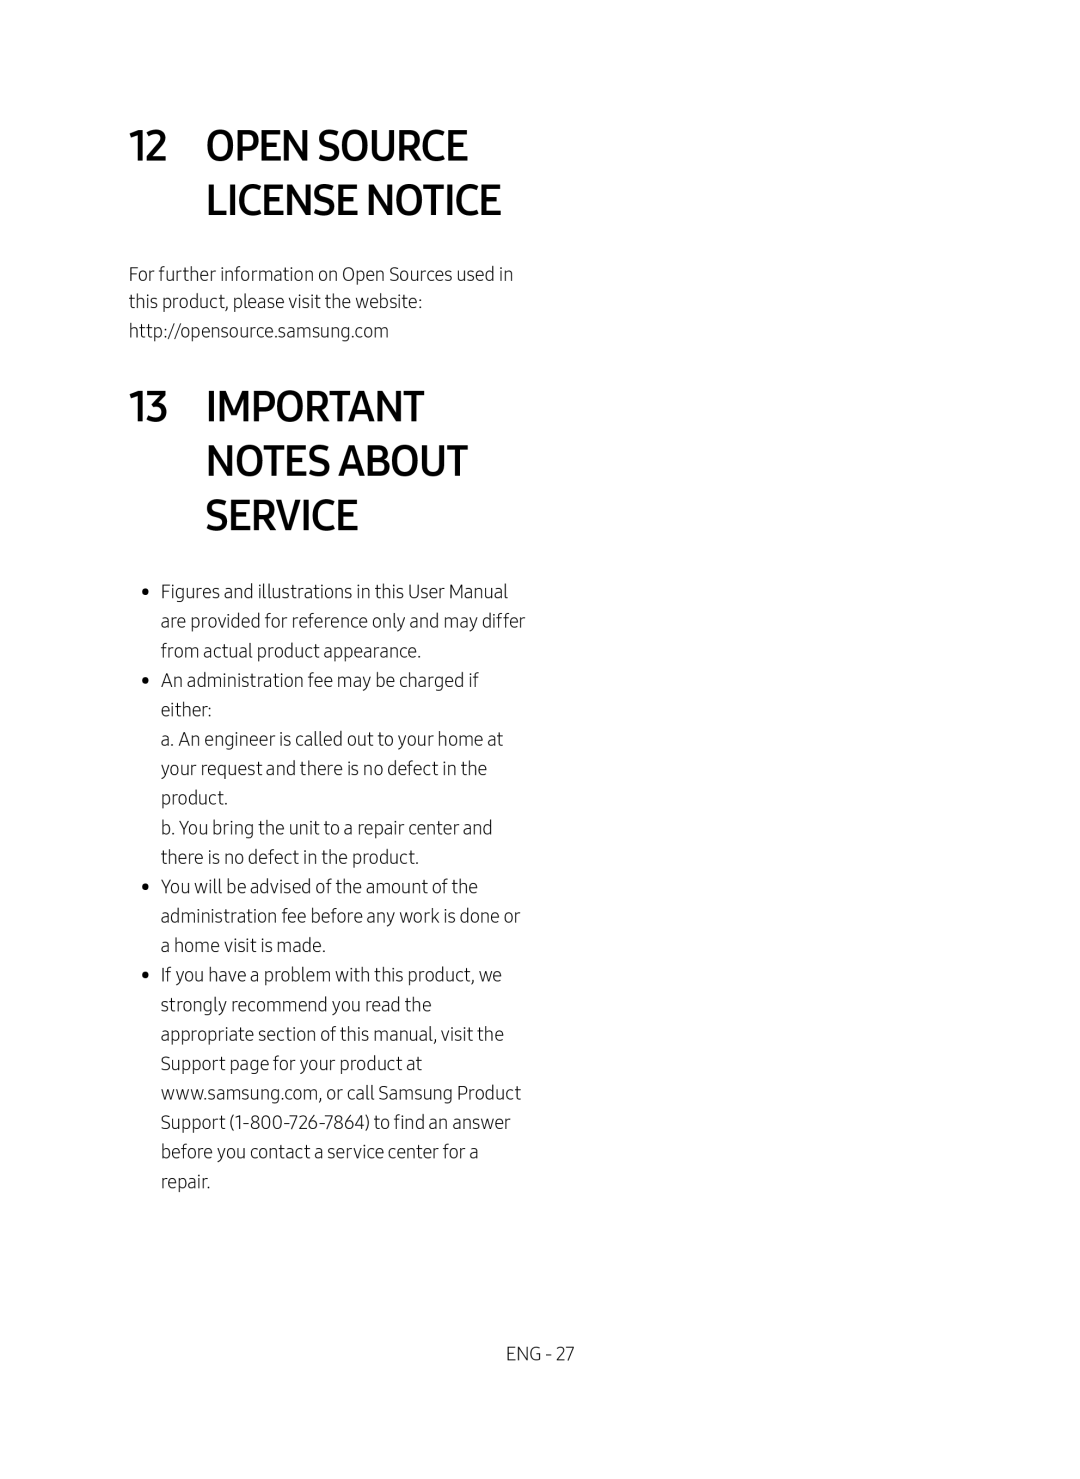 12OPEN SOURCE LICENSE NOTICE 13IMPORTANT NOTES ABOUT SERVICE